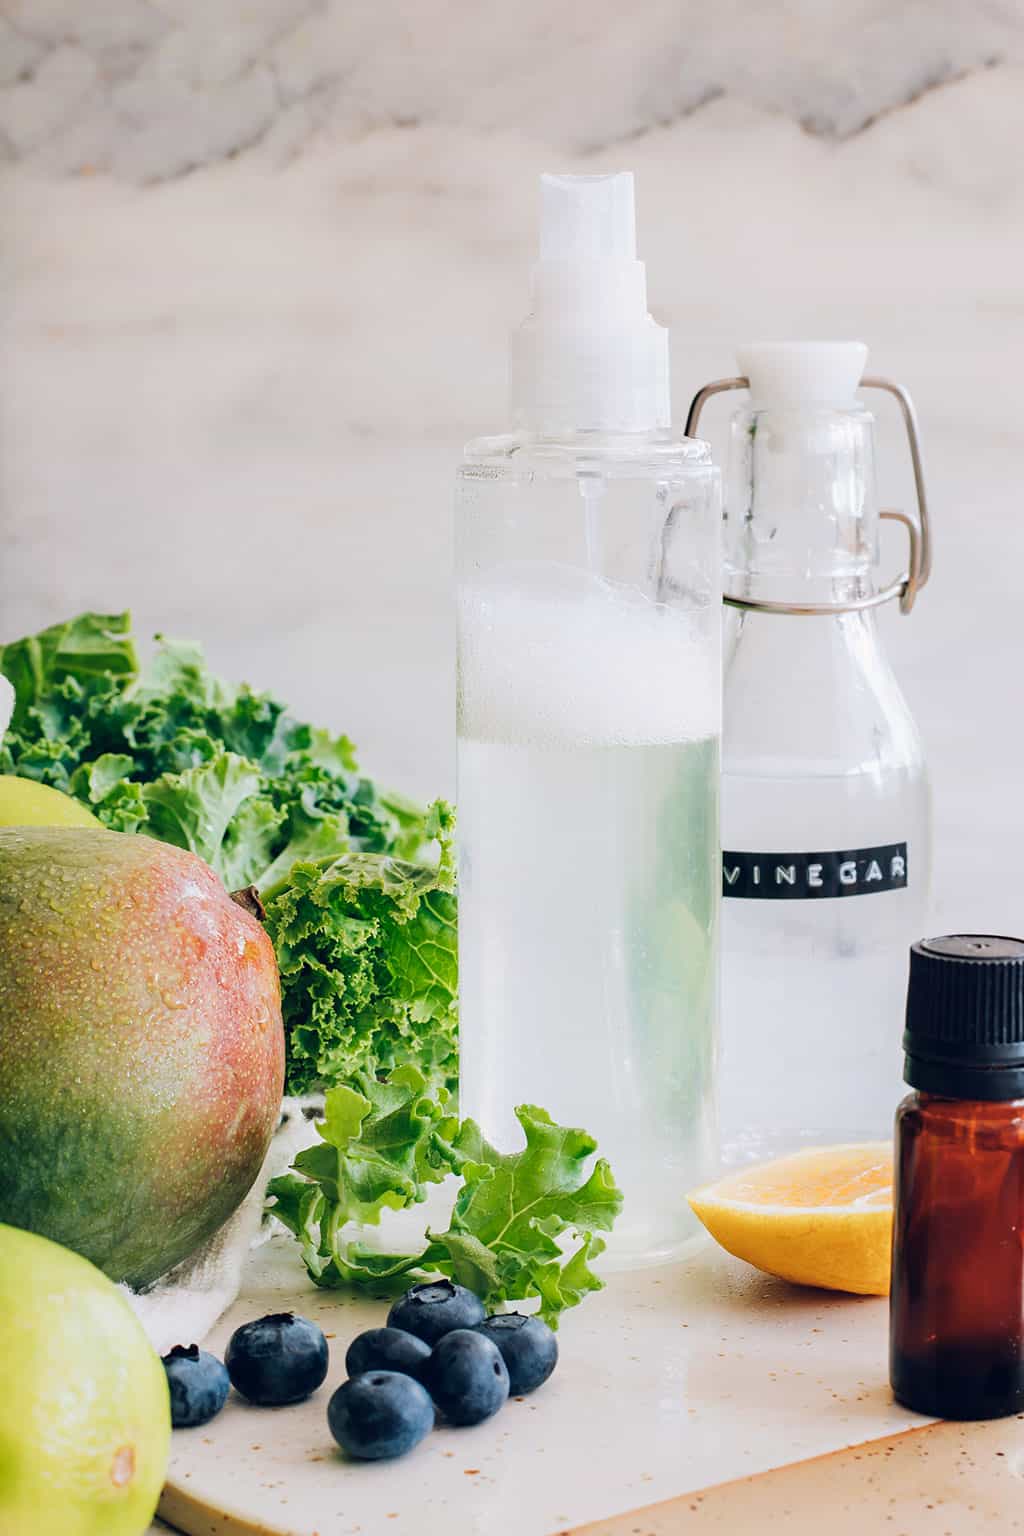 DIY Cleaning Spray for fruits and veggies